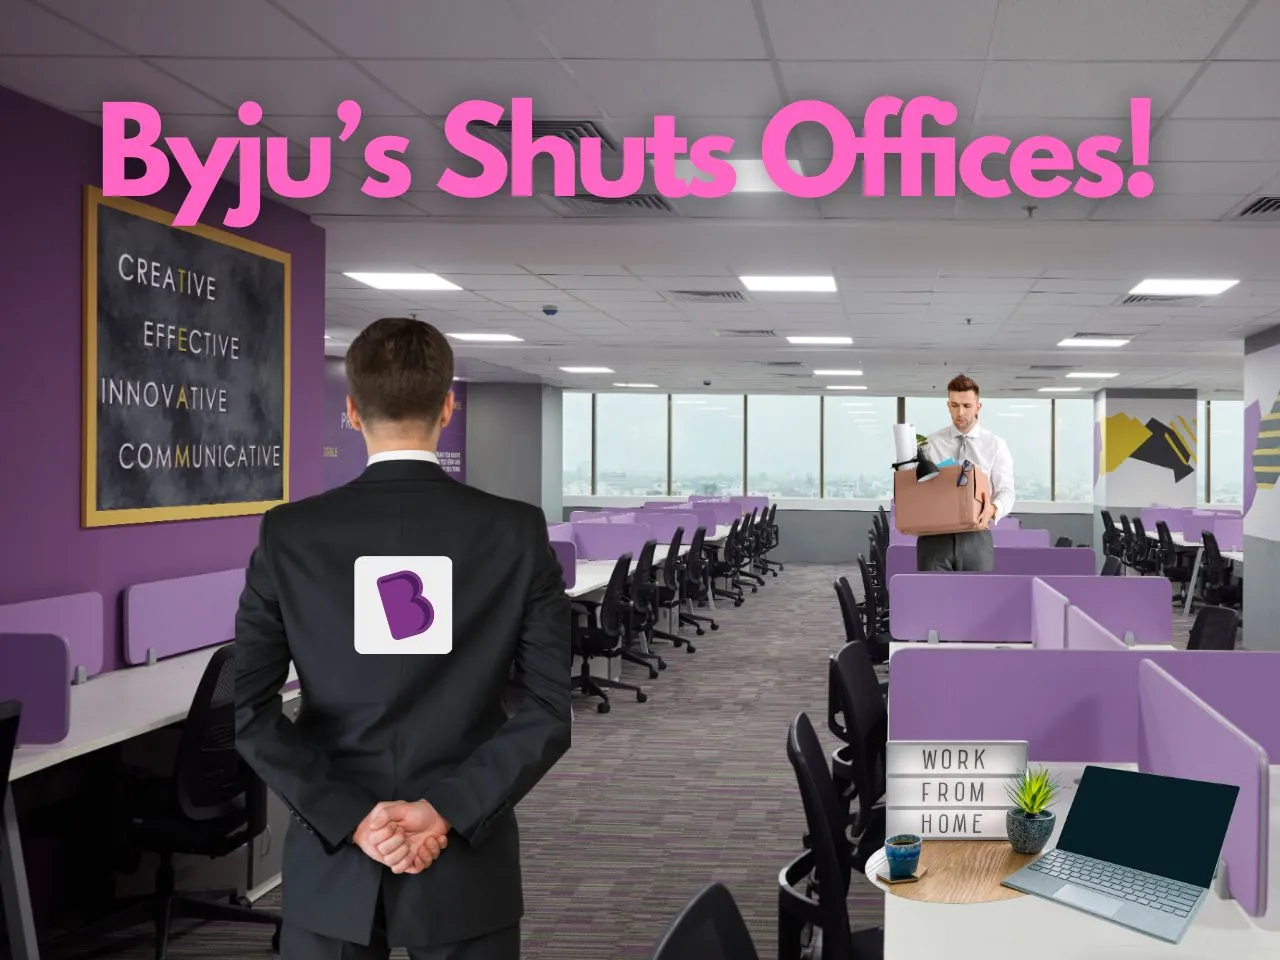 Byju's Abandons Almost All Offices, Enforces Remote Work Nationwide